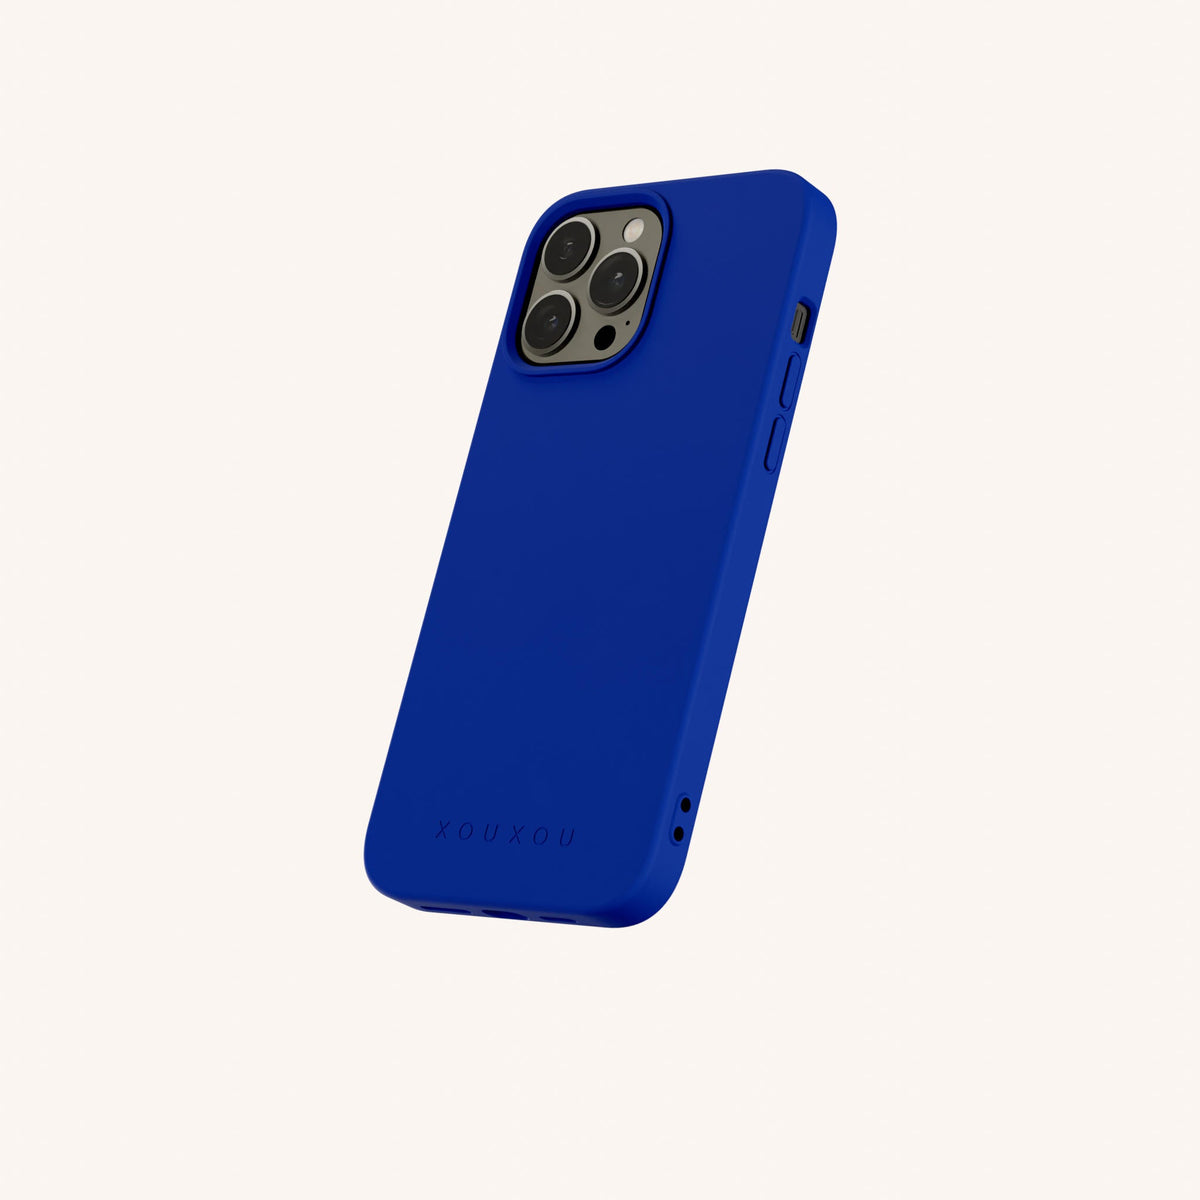 Phone Case for iPhone 13 Pro Max without MagSafe in Blue Perspective View | XOUXOU #phone model_iphone 13 pro max